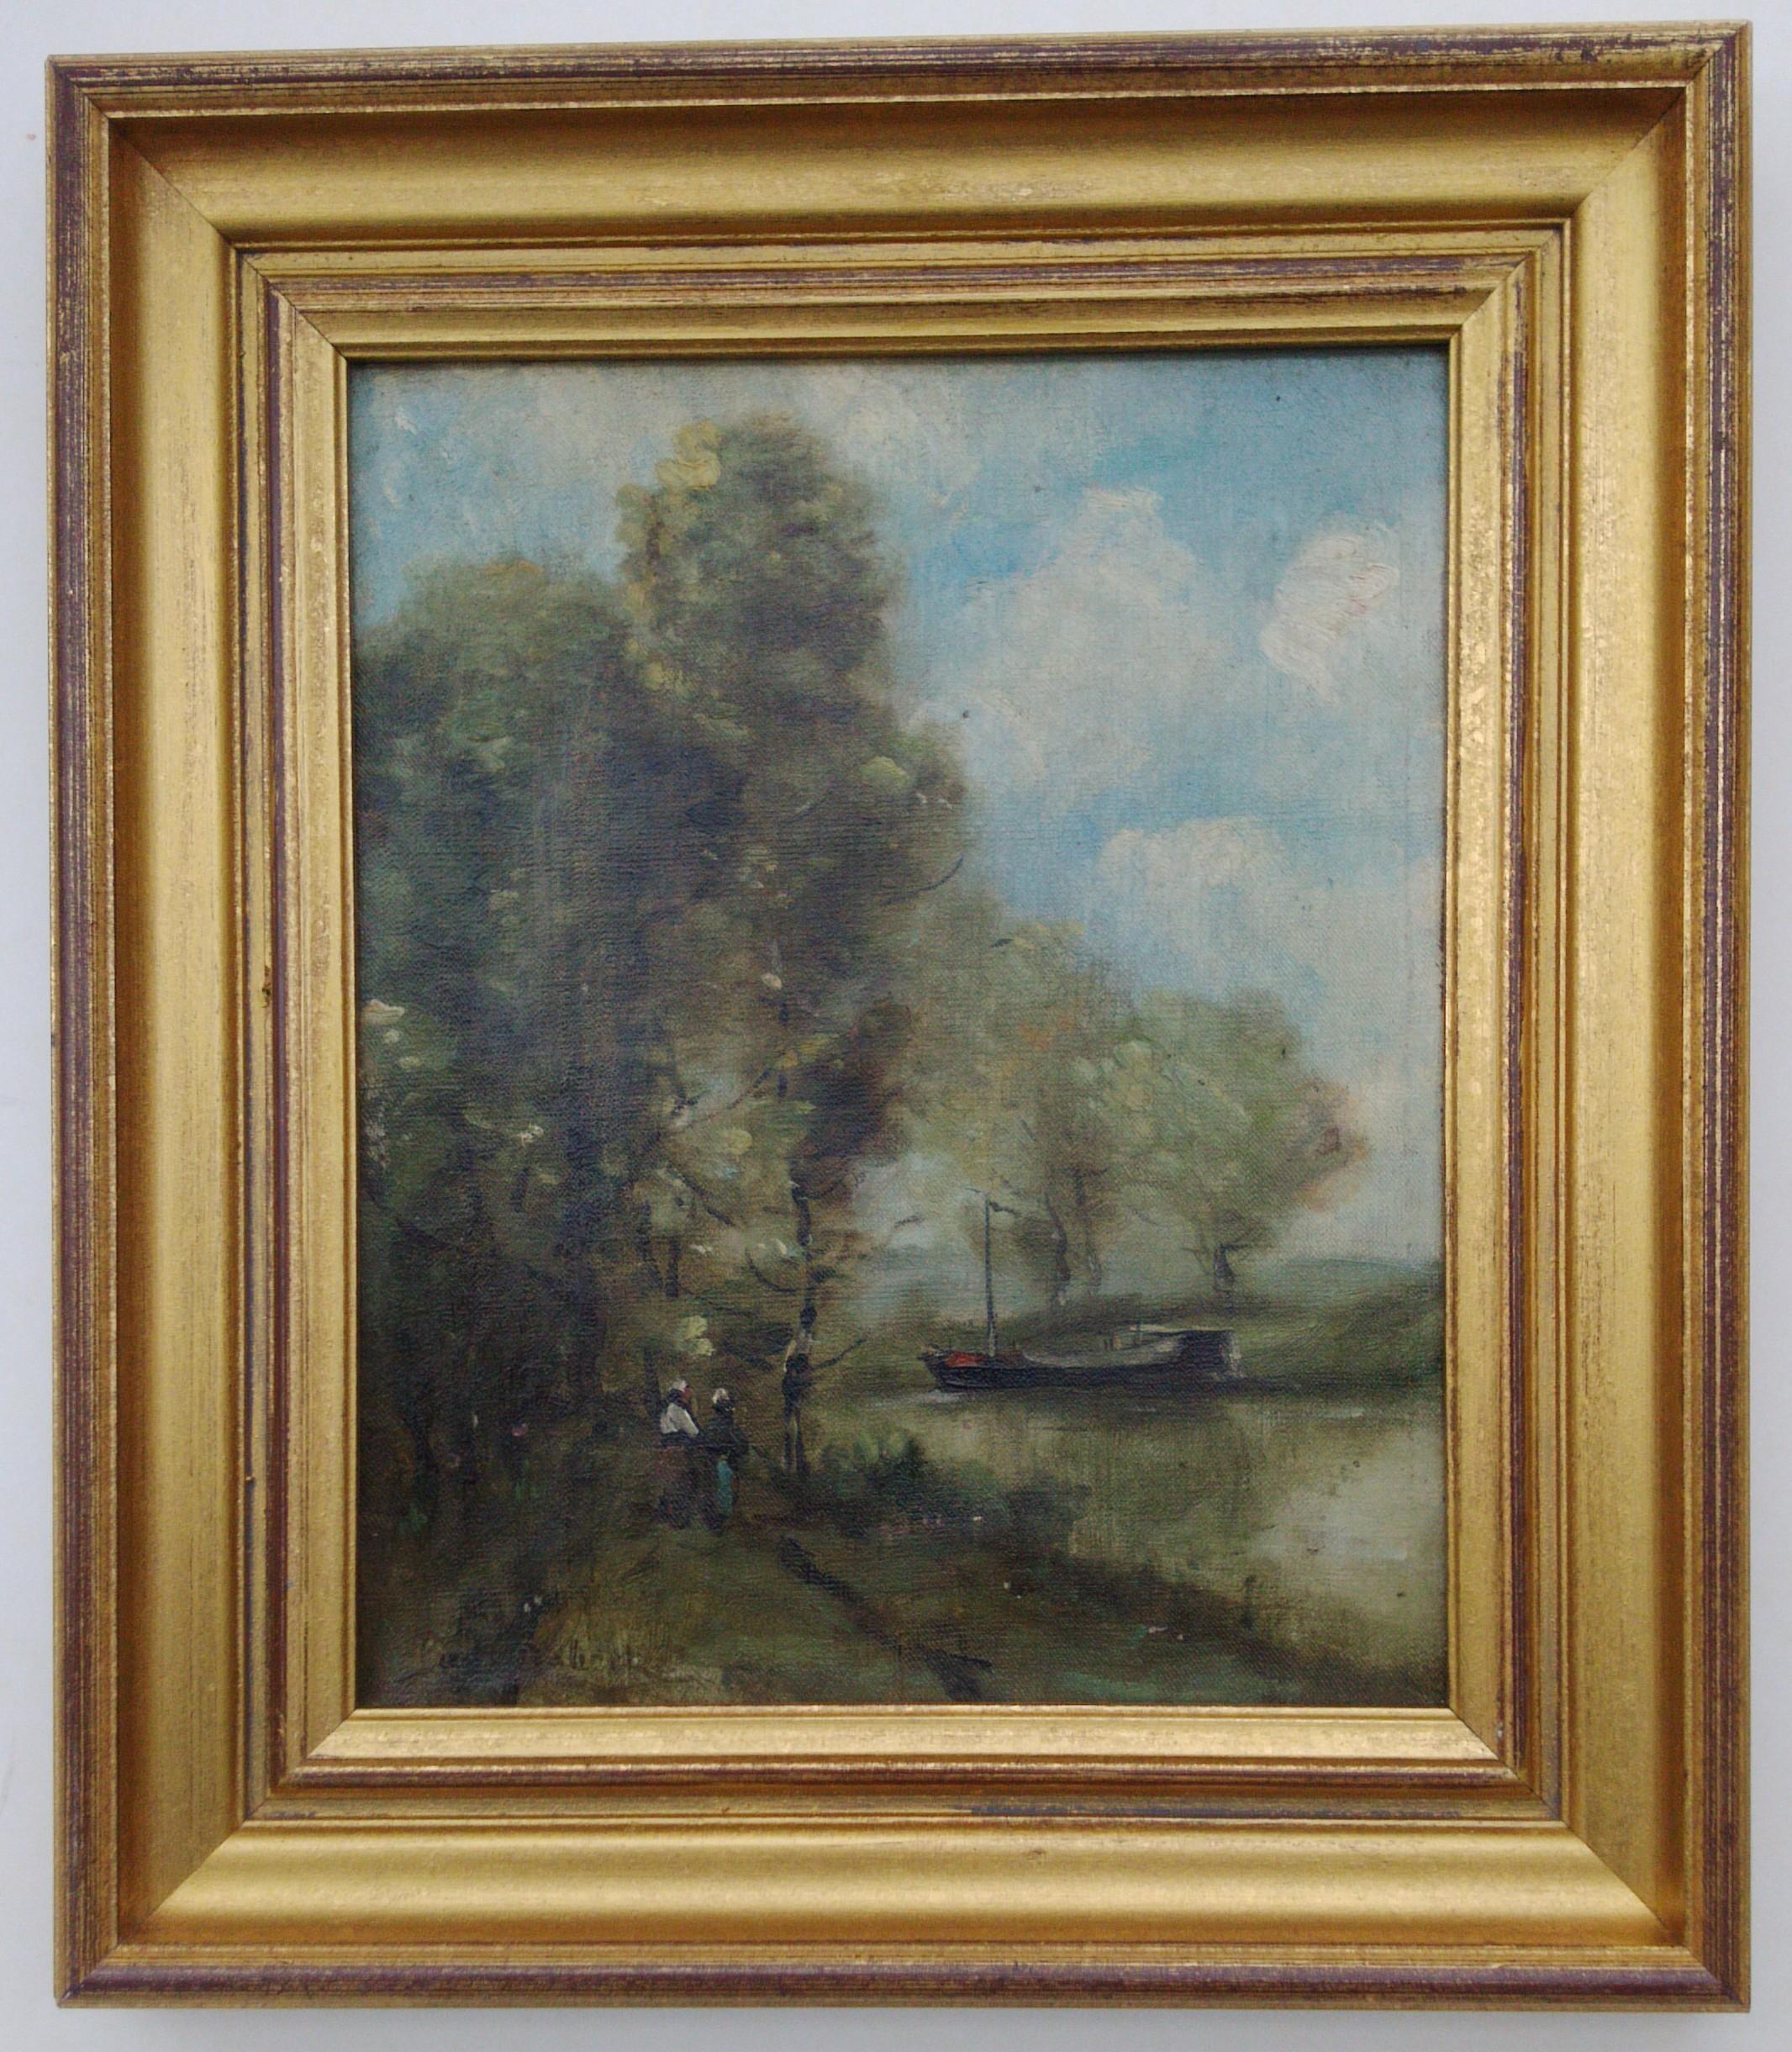 A gorgeous 19th century landscape that very much resembles the work of the important Barbizon artist Paul Déziré Trouillebert. The painting is however signed P...l Robert, and I believe it may be a work by the equally great Swiss artist Paul Robert